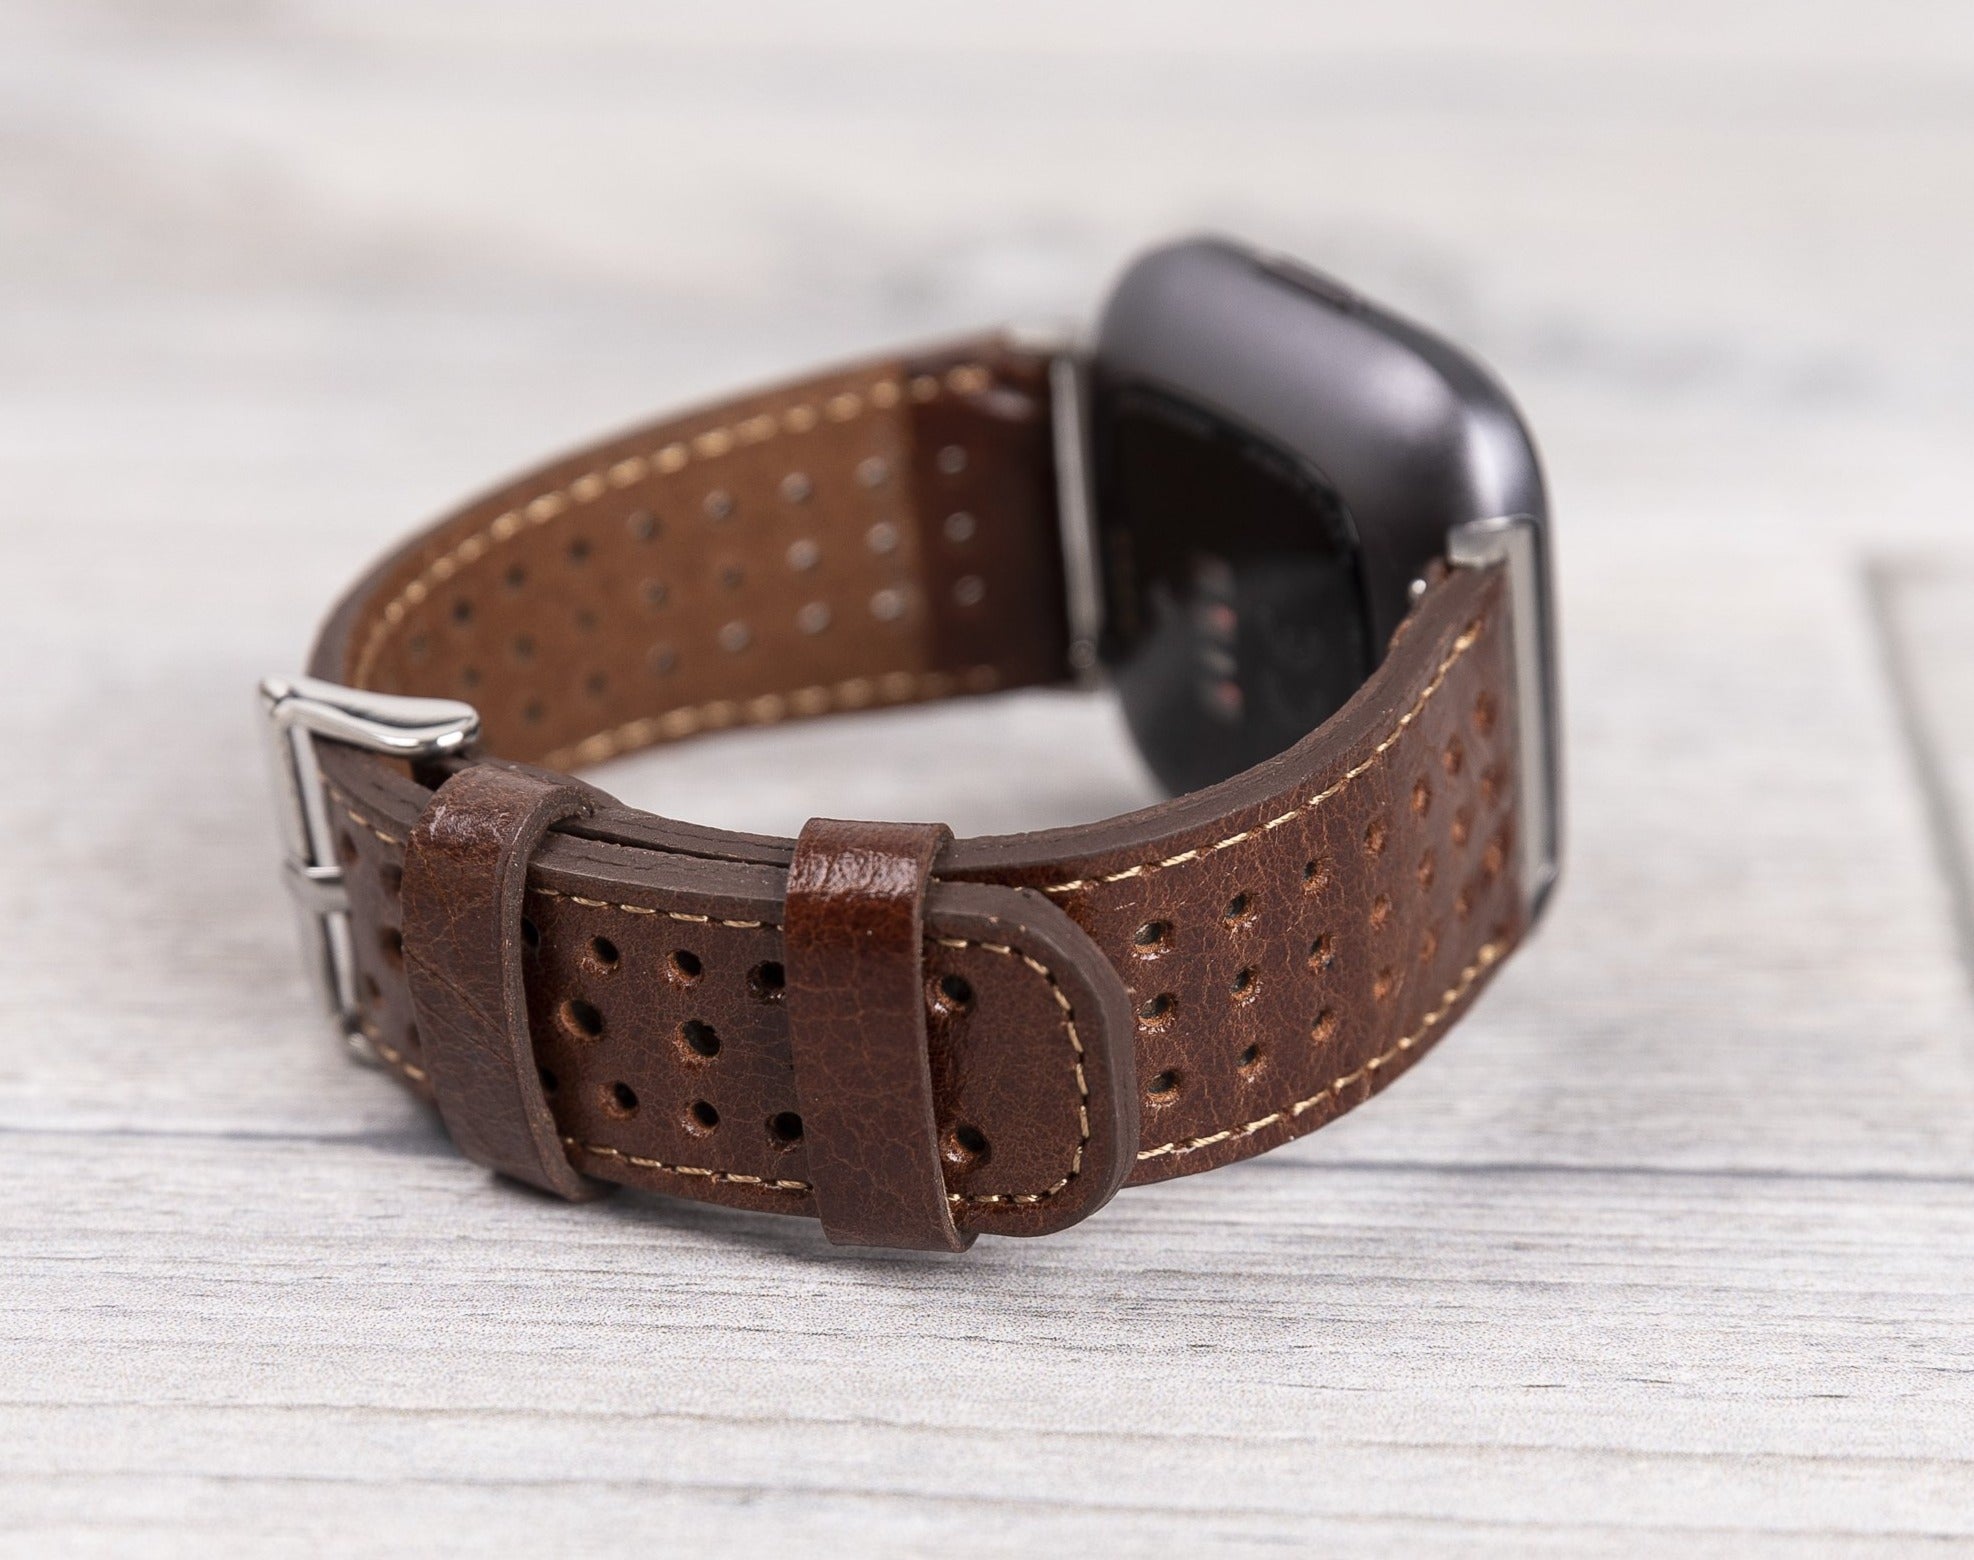 Perforated Dark Brown Leather Band for Fitbit Watch